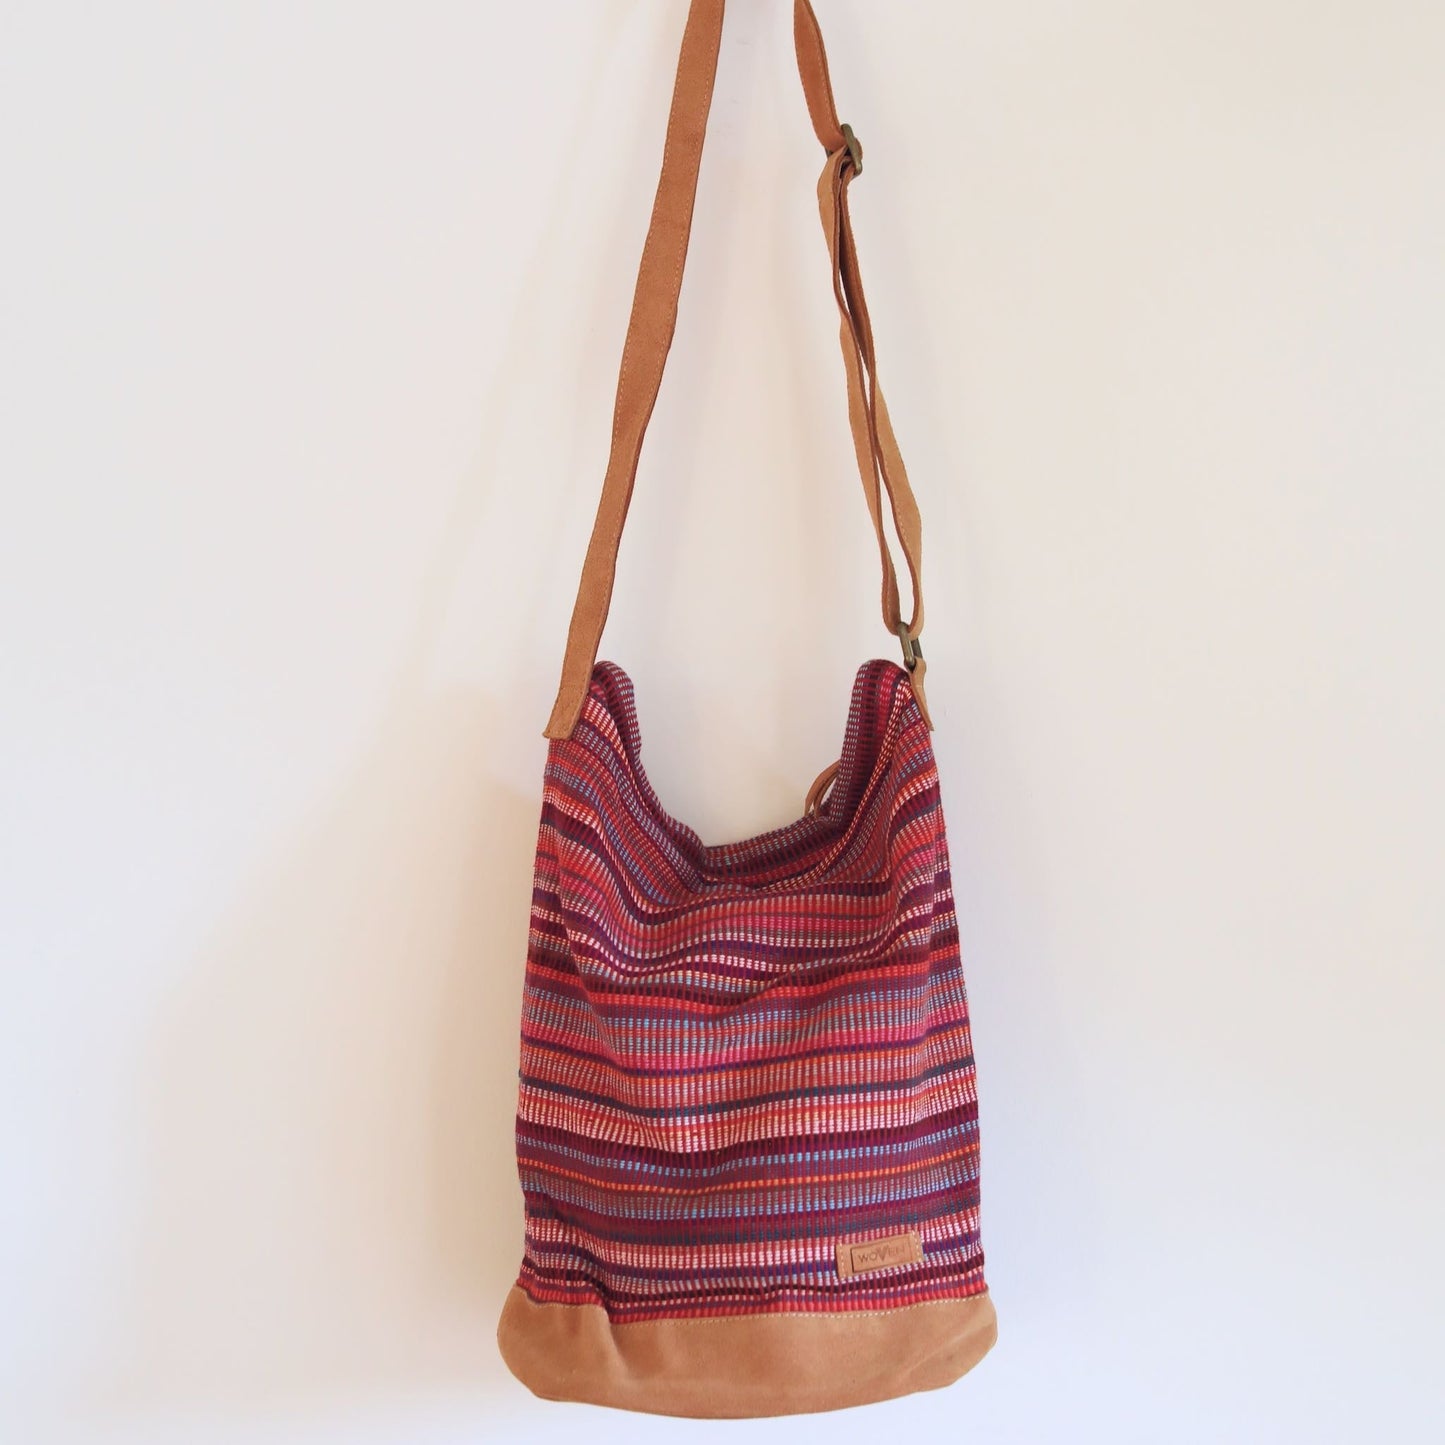 Wholesale Deals on women's handmade bags: Nepal WOVEN fair trade brand - Ganapati Crafts Co.